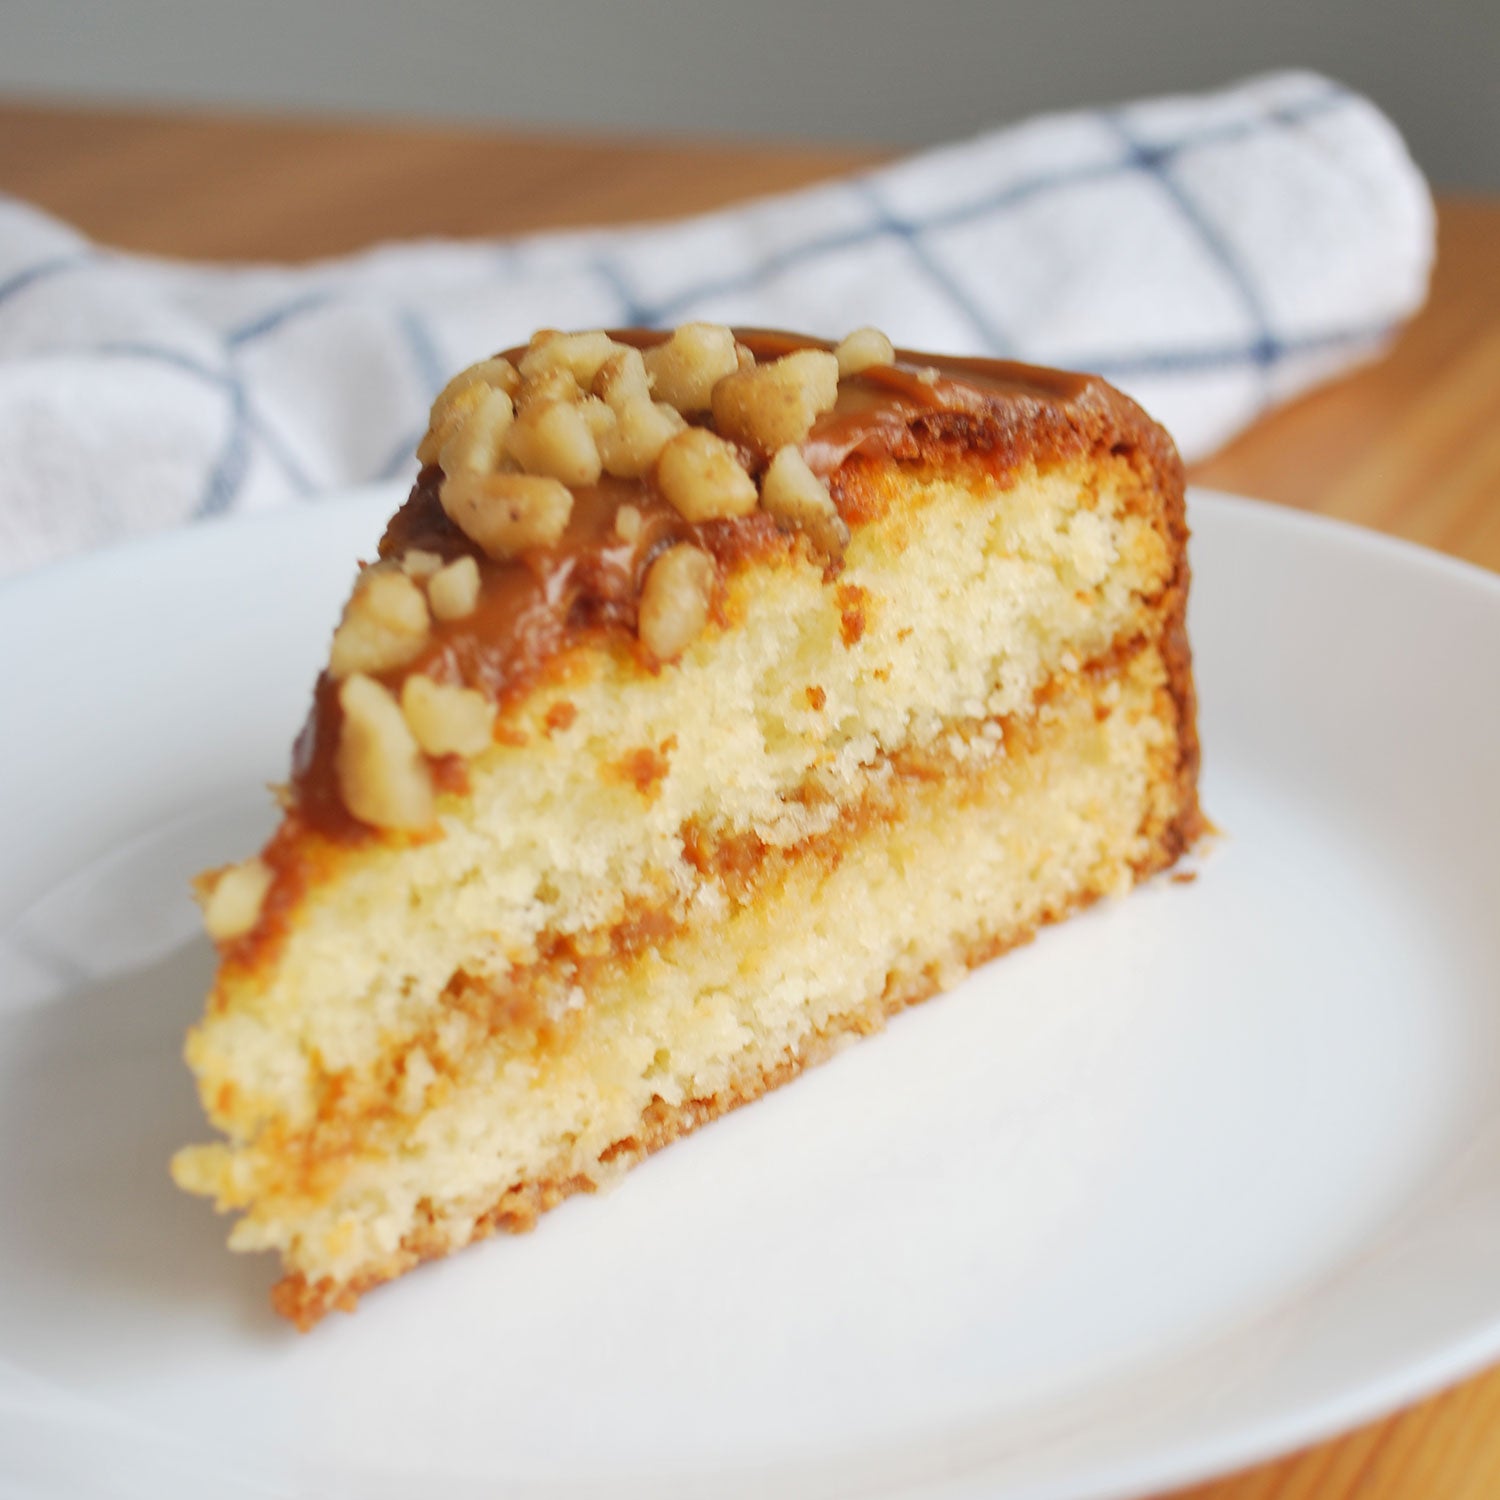 Homemade nuts and dulce de leche cake